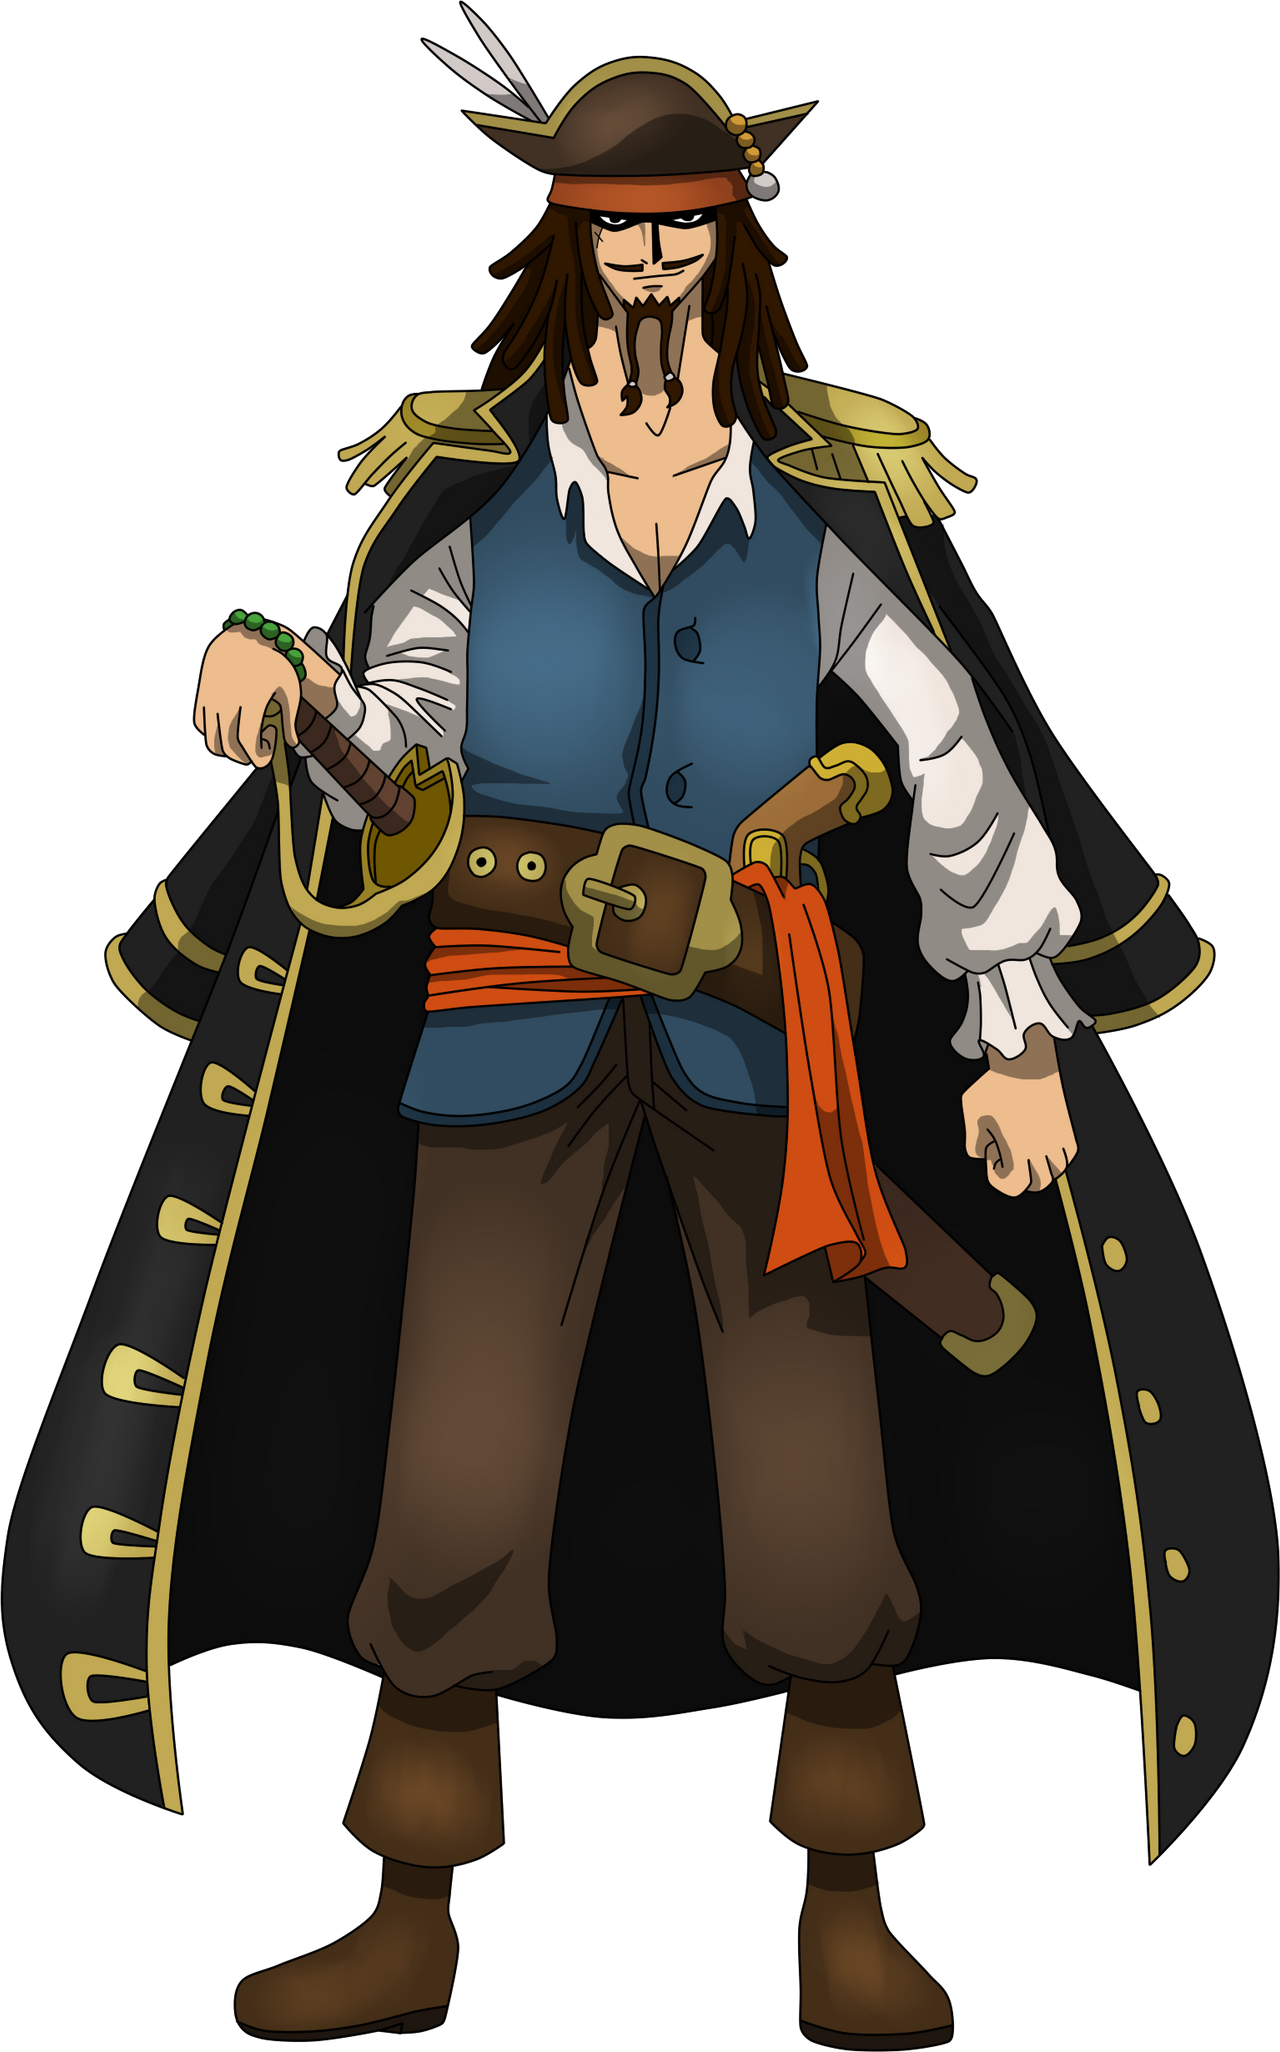 Jack Sparrow - One piece Style by caiquenadal on DeviantArt